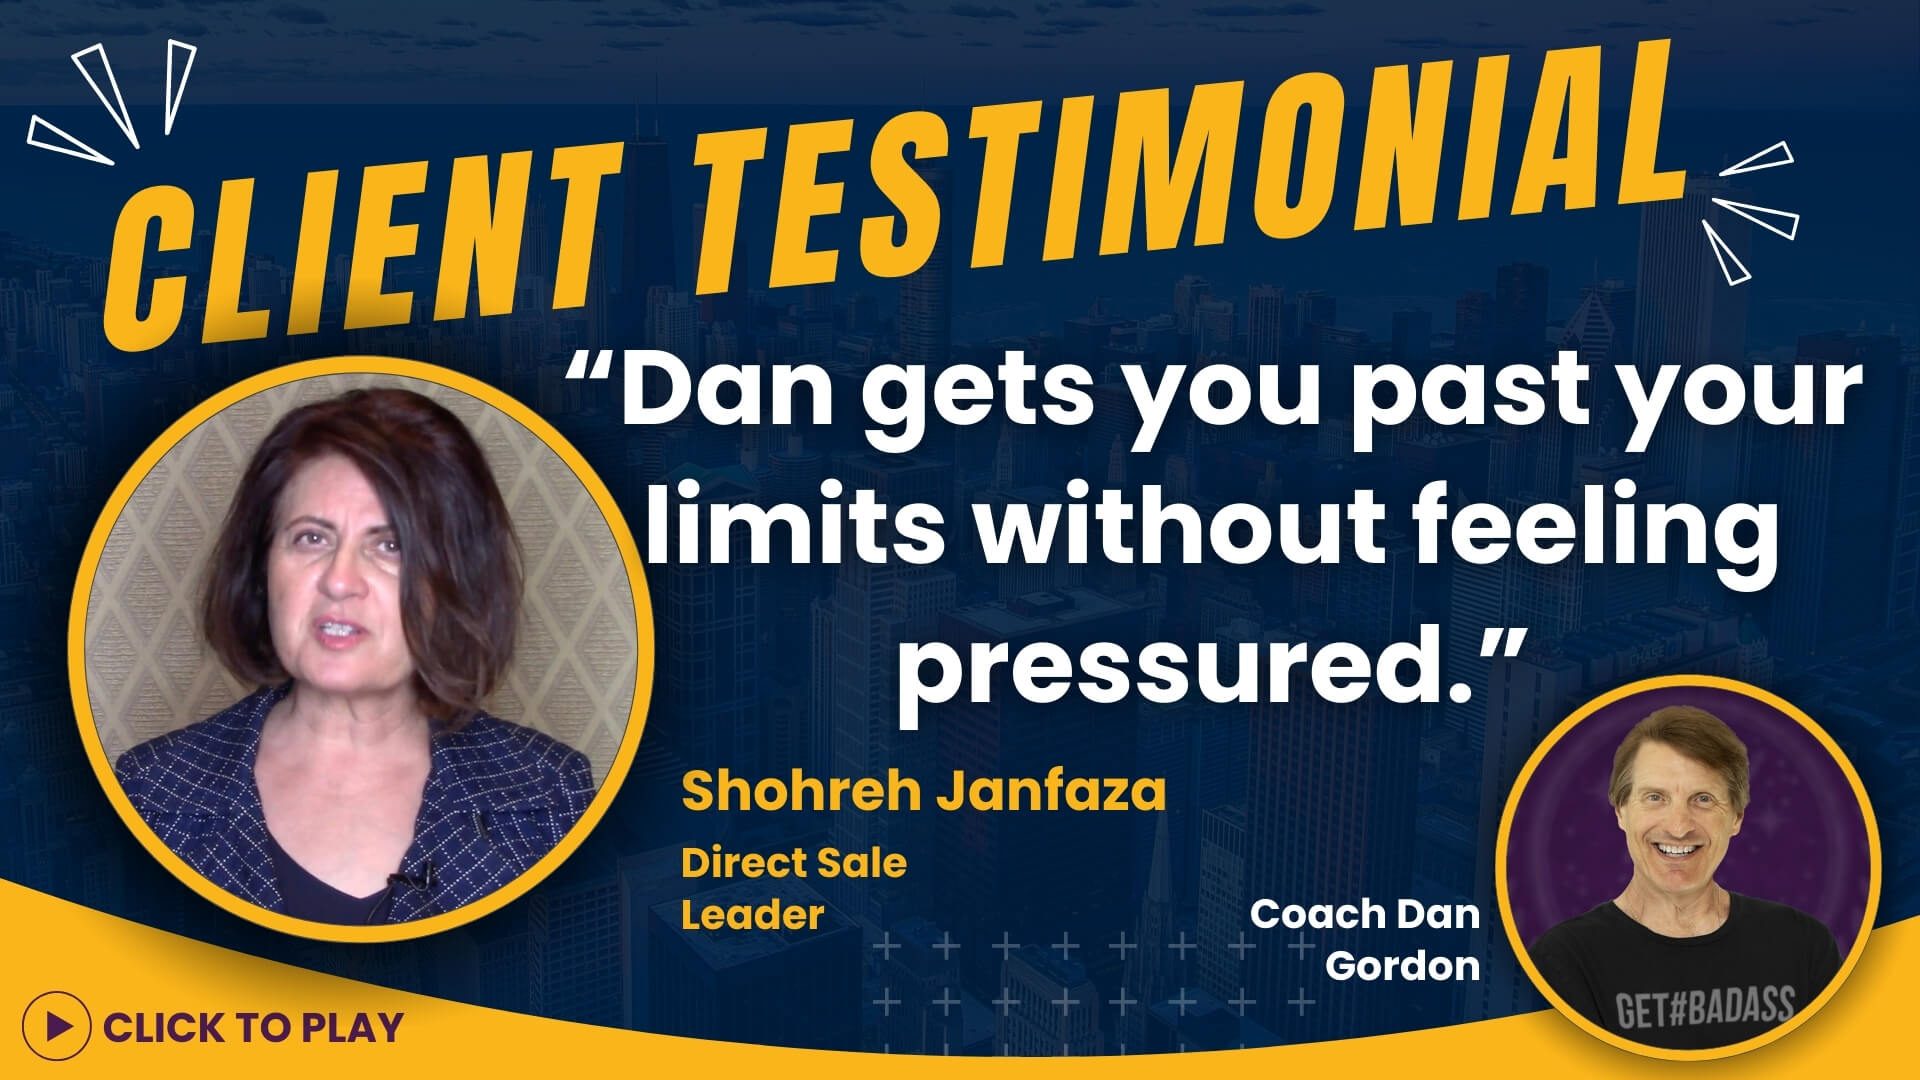 Shohreh Janfaza, a direct sales leader, shares a testimonial for Coach Dan Gordon, mentioning how he helps push limits without pressure.